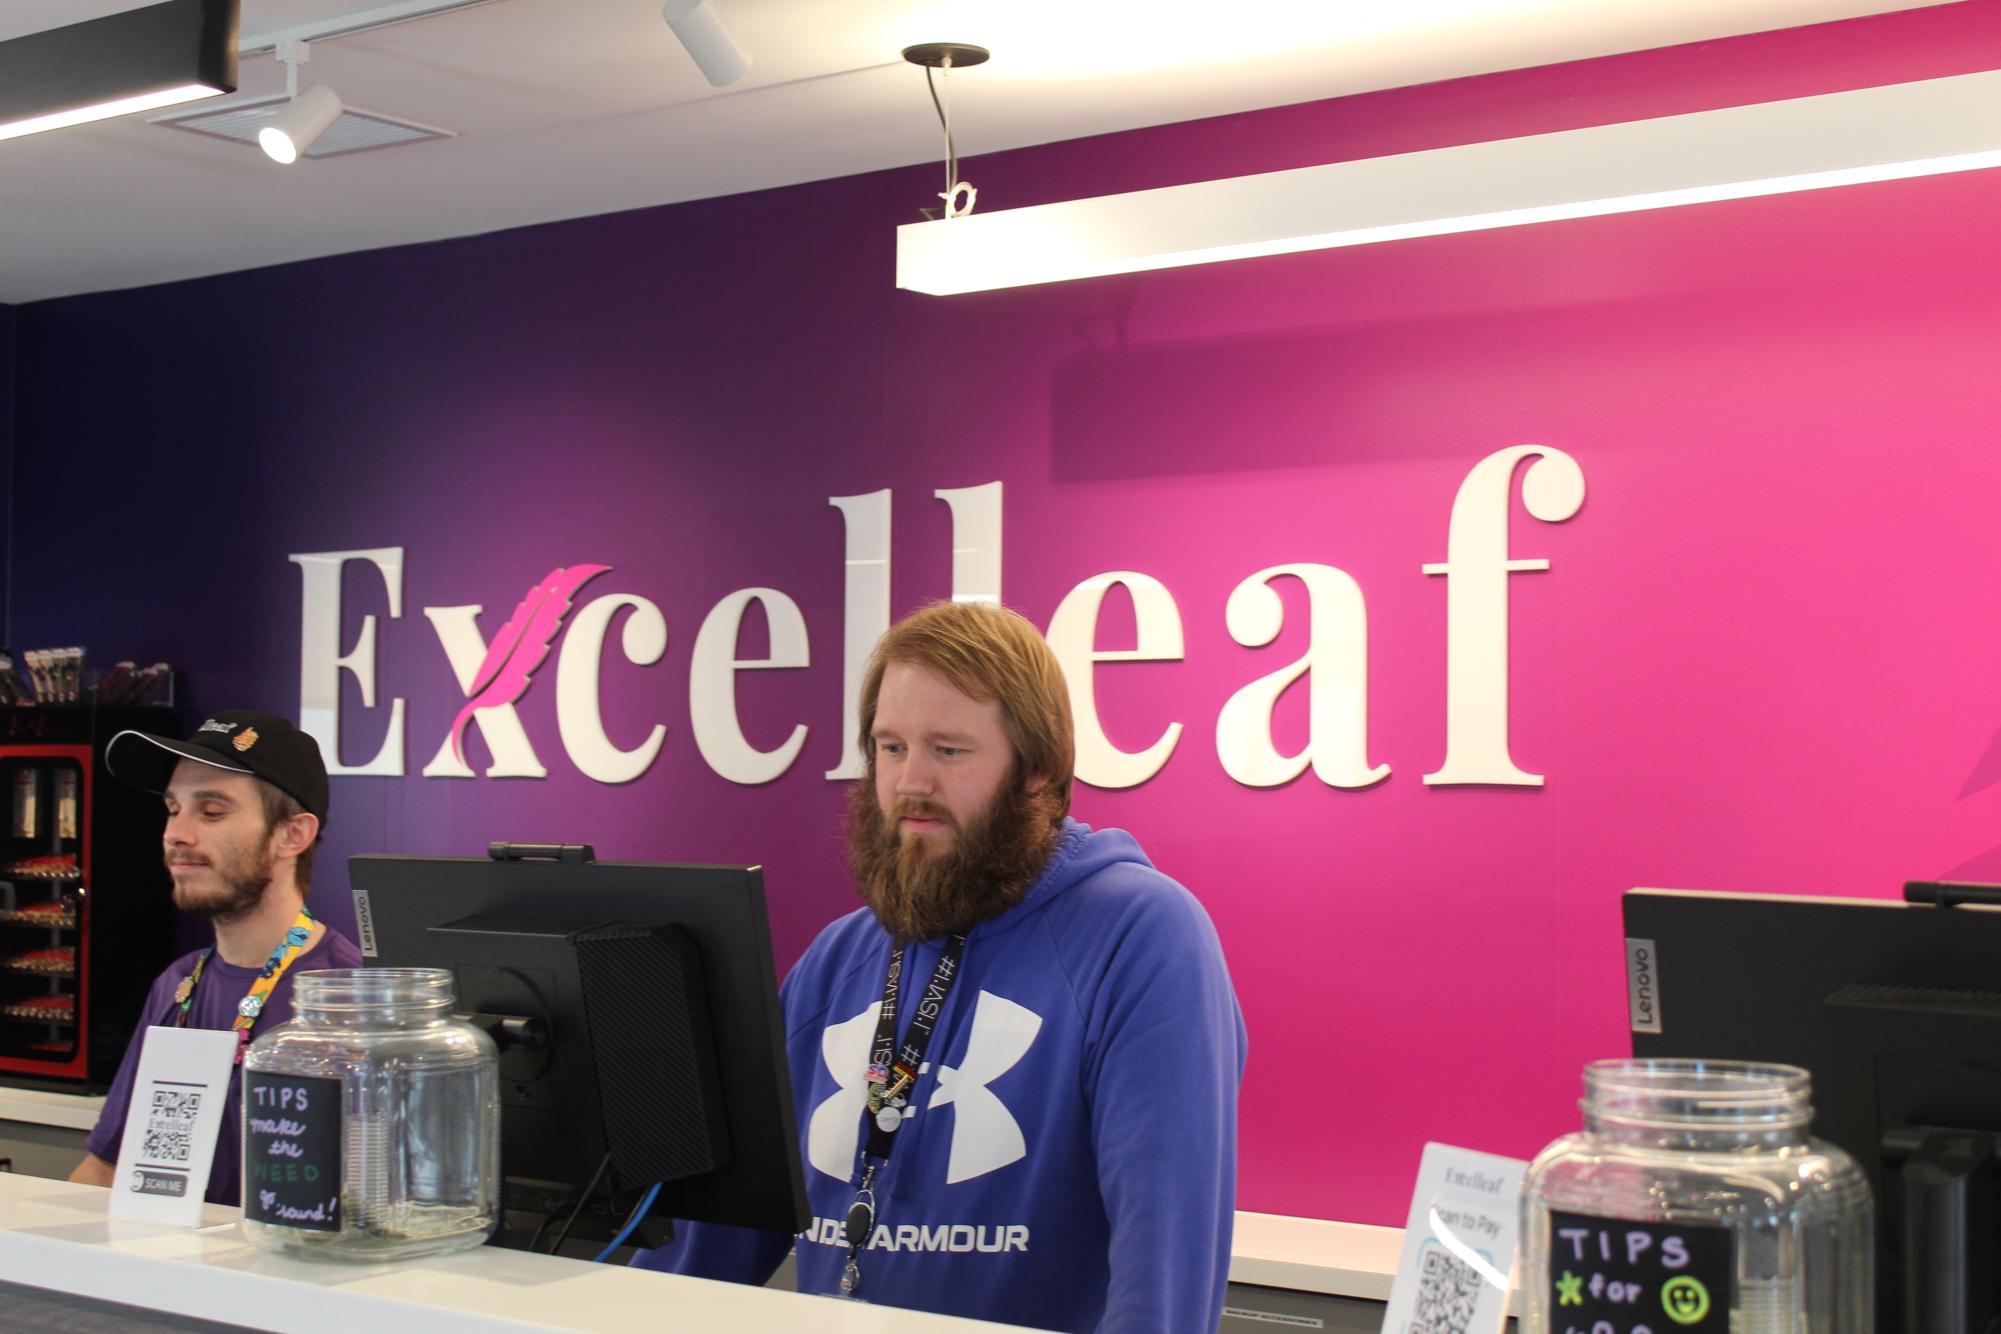 Staff of the Excelleaf recreational cannabis dispensary help out customers during the soft launch. Excelleaf is hosting its grand opening from 9 a.m. to 9 p.m. Friday at 305 E. Locust St. (Michael Mollsen | Northern Star)